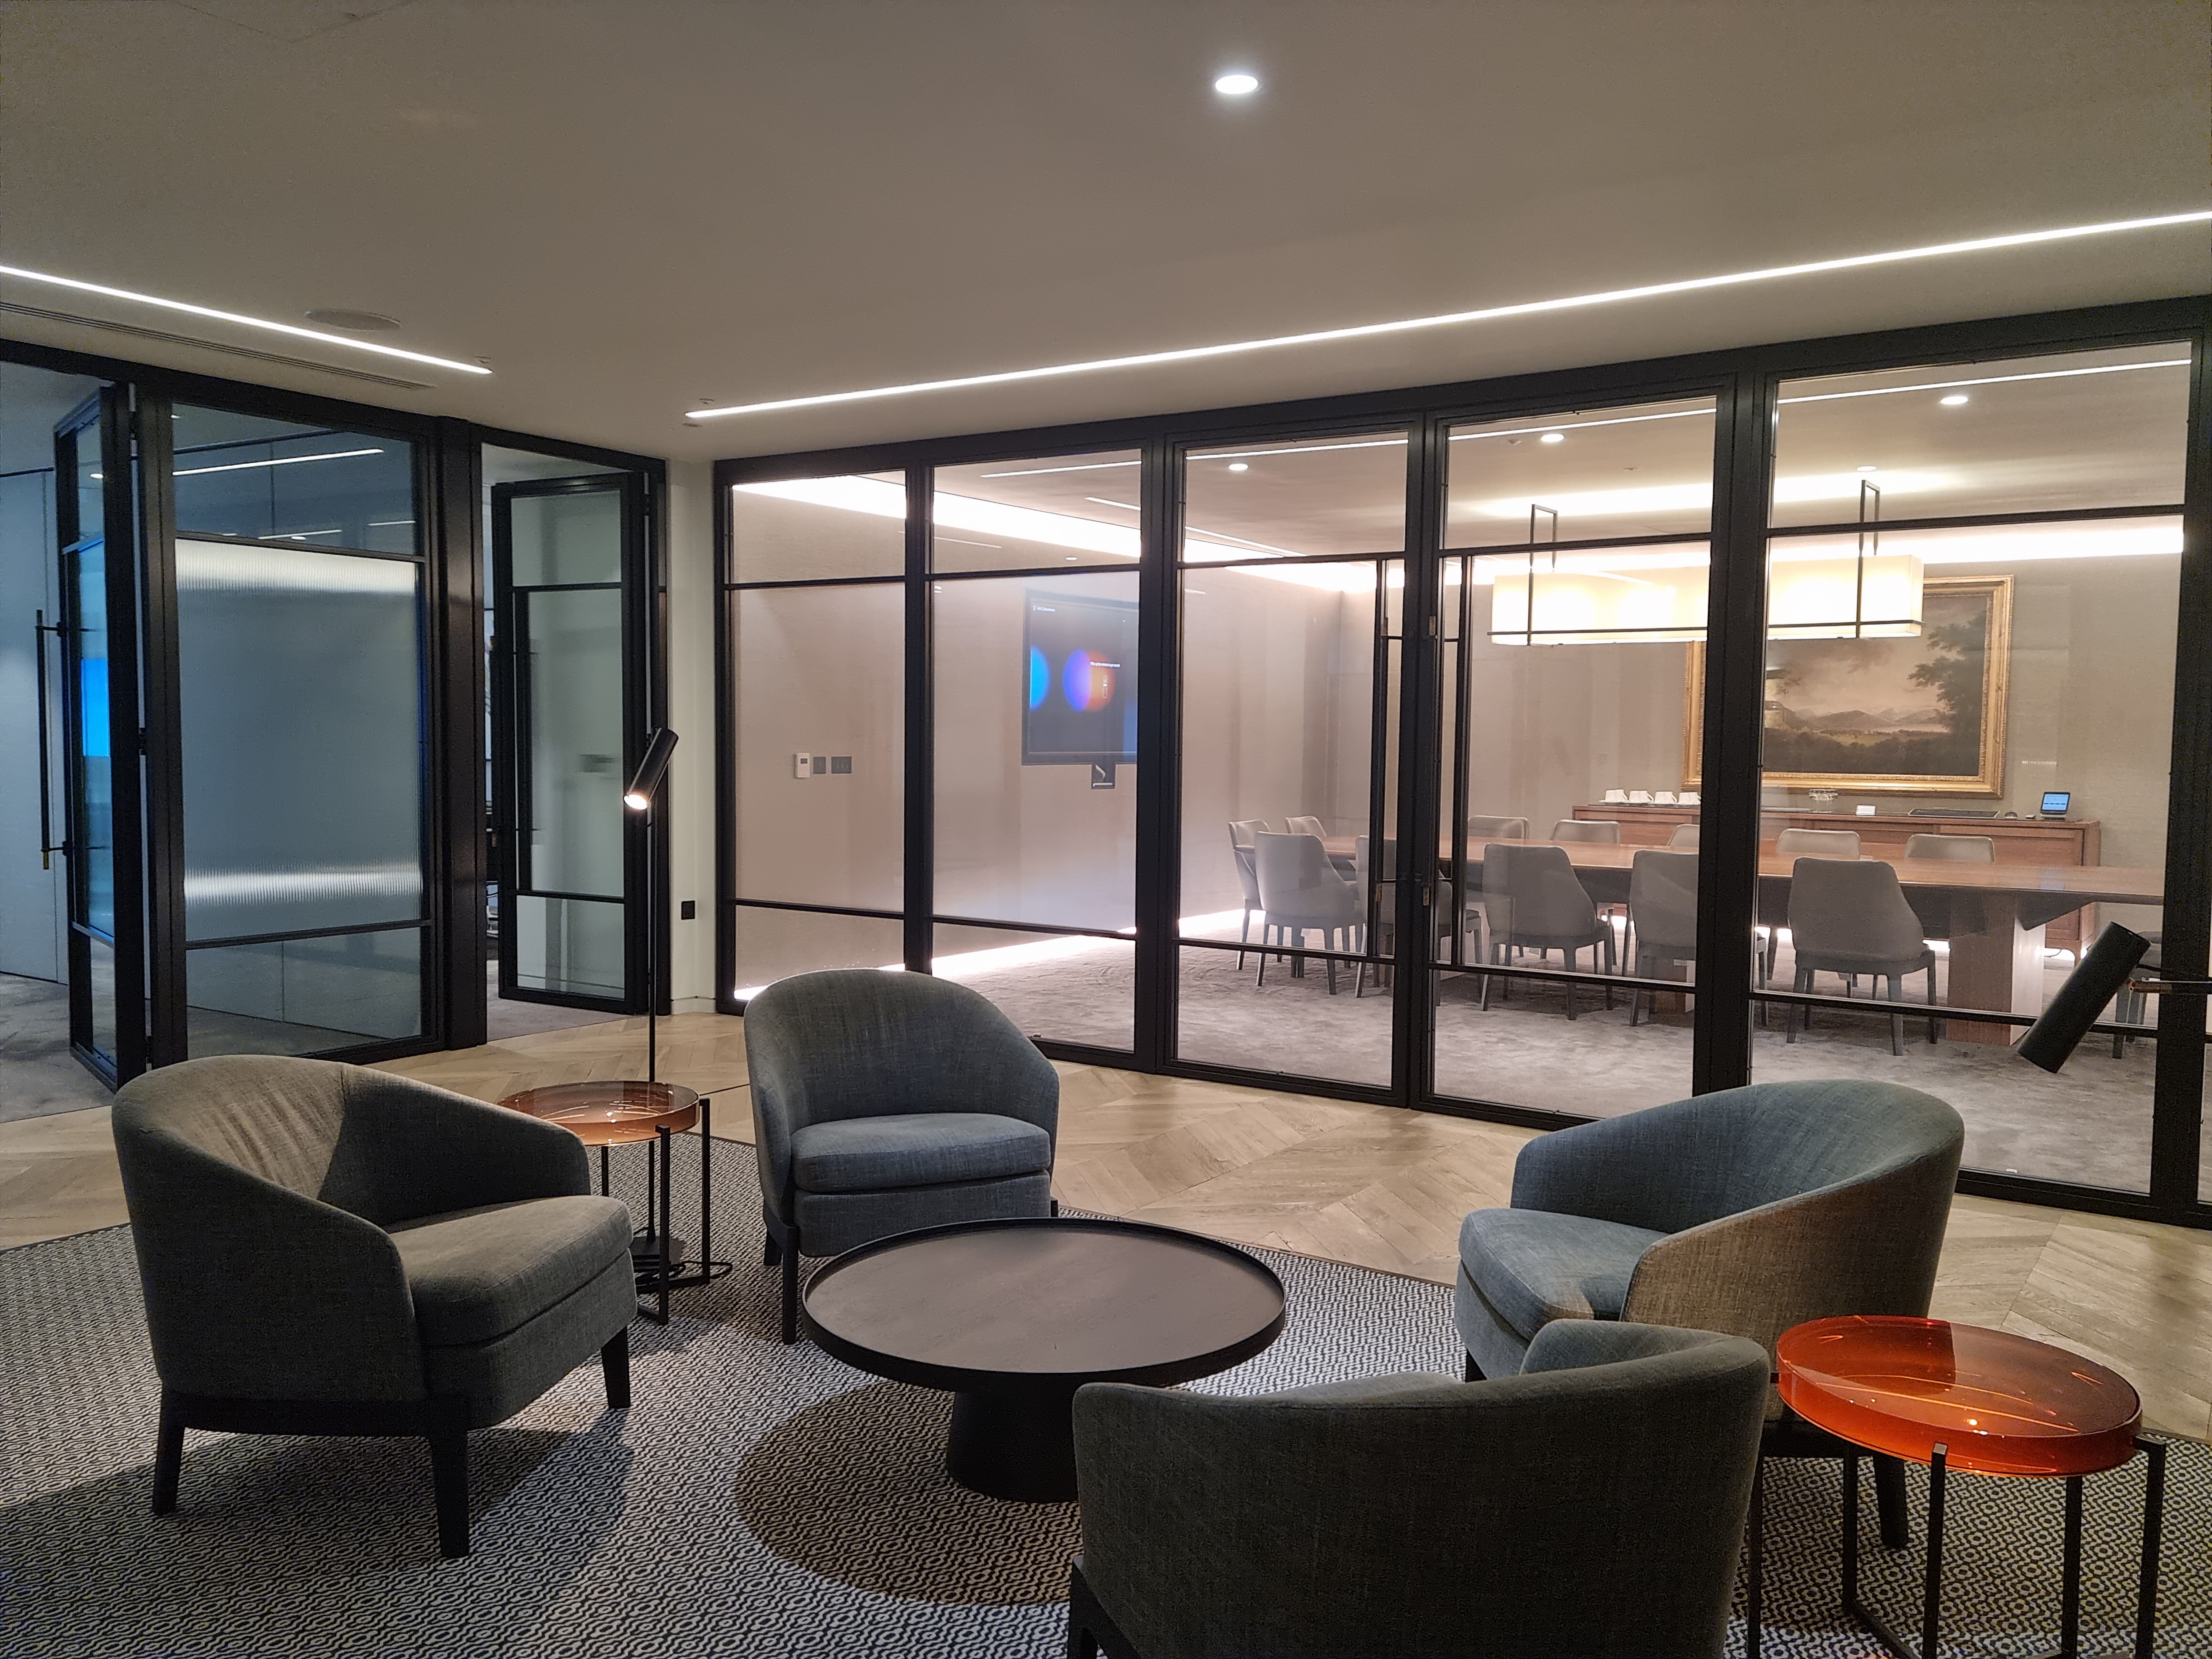 A client recently designed a project involving Privacy Smart Glass to ensure visual and acoustic privacy when required ('On' image)